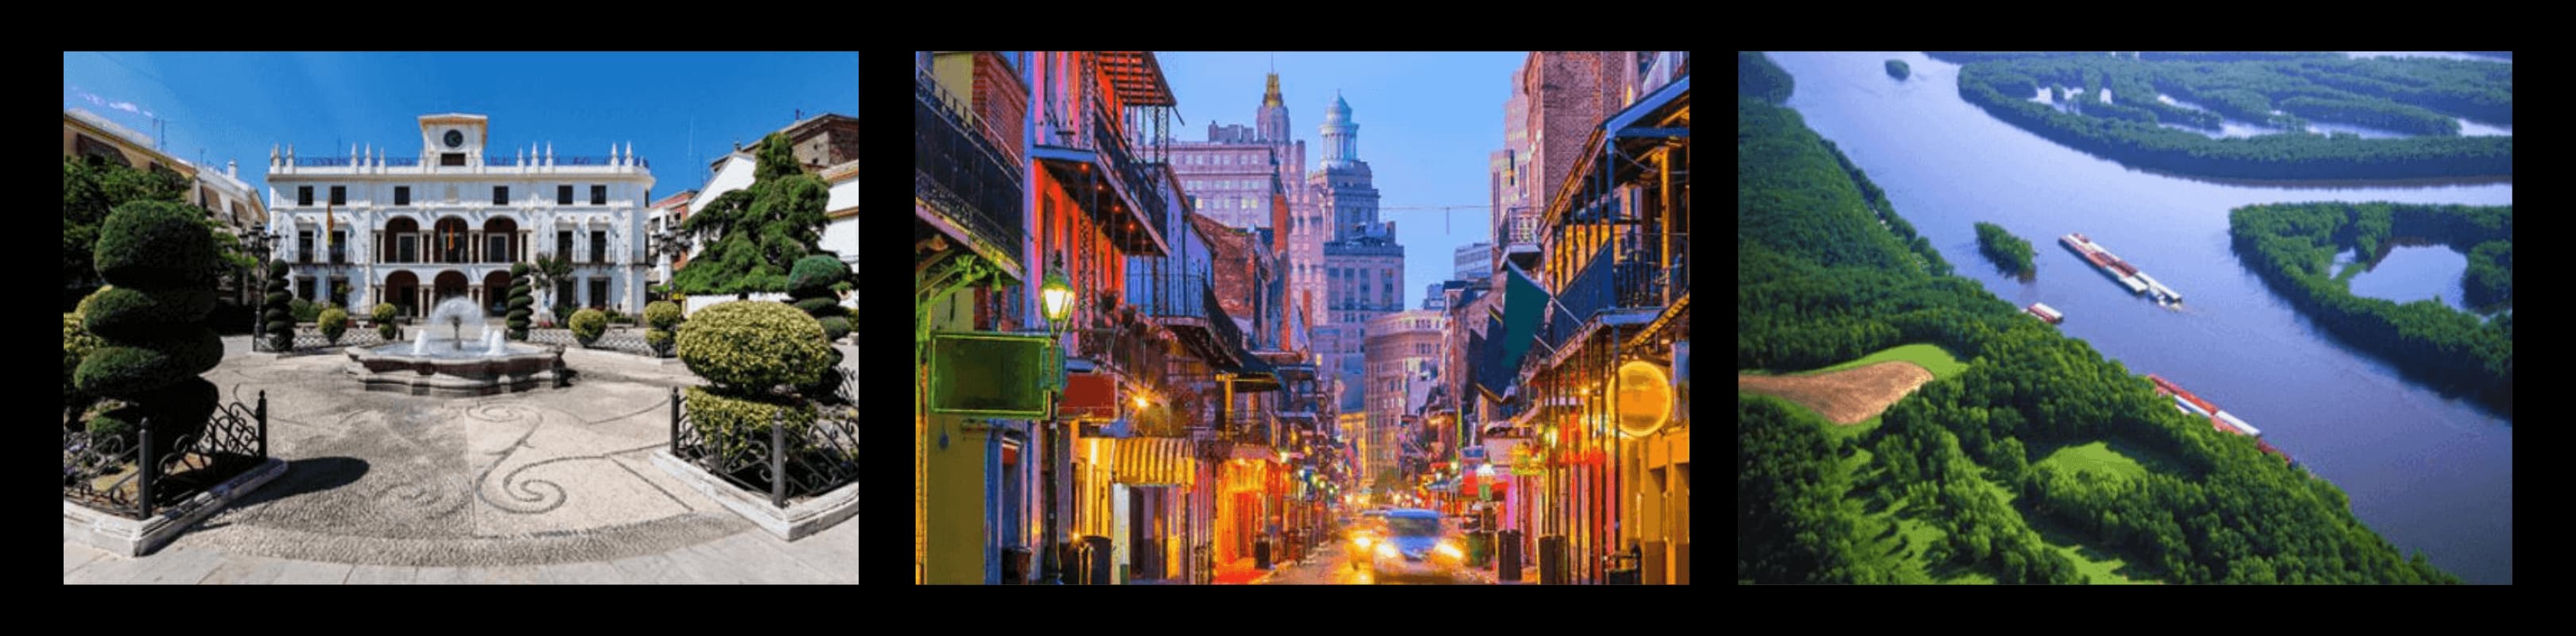 NEW_ORLEANS